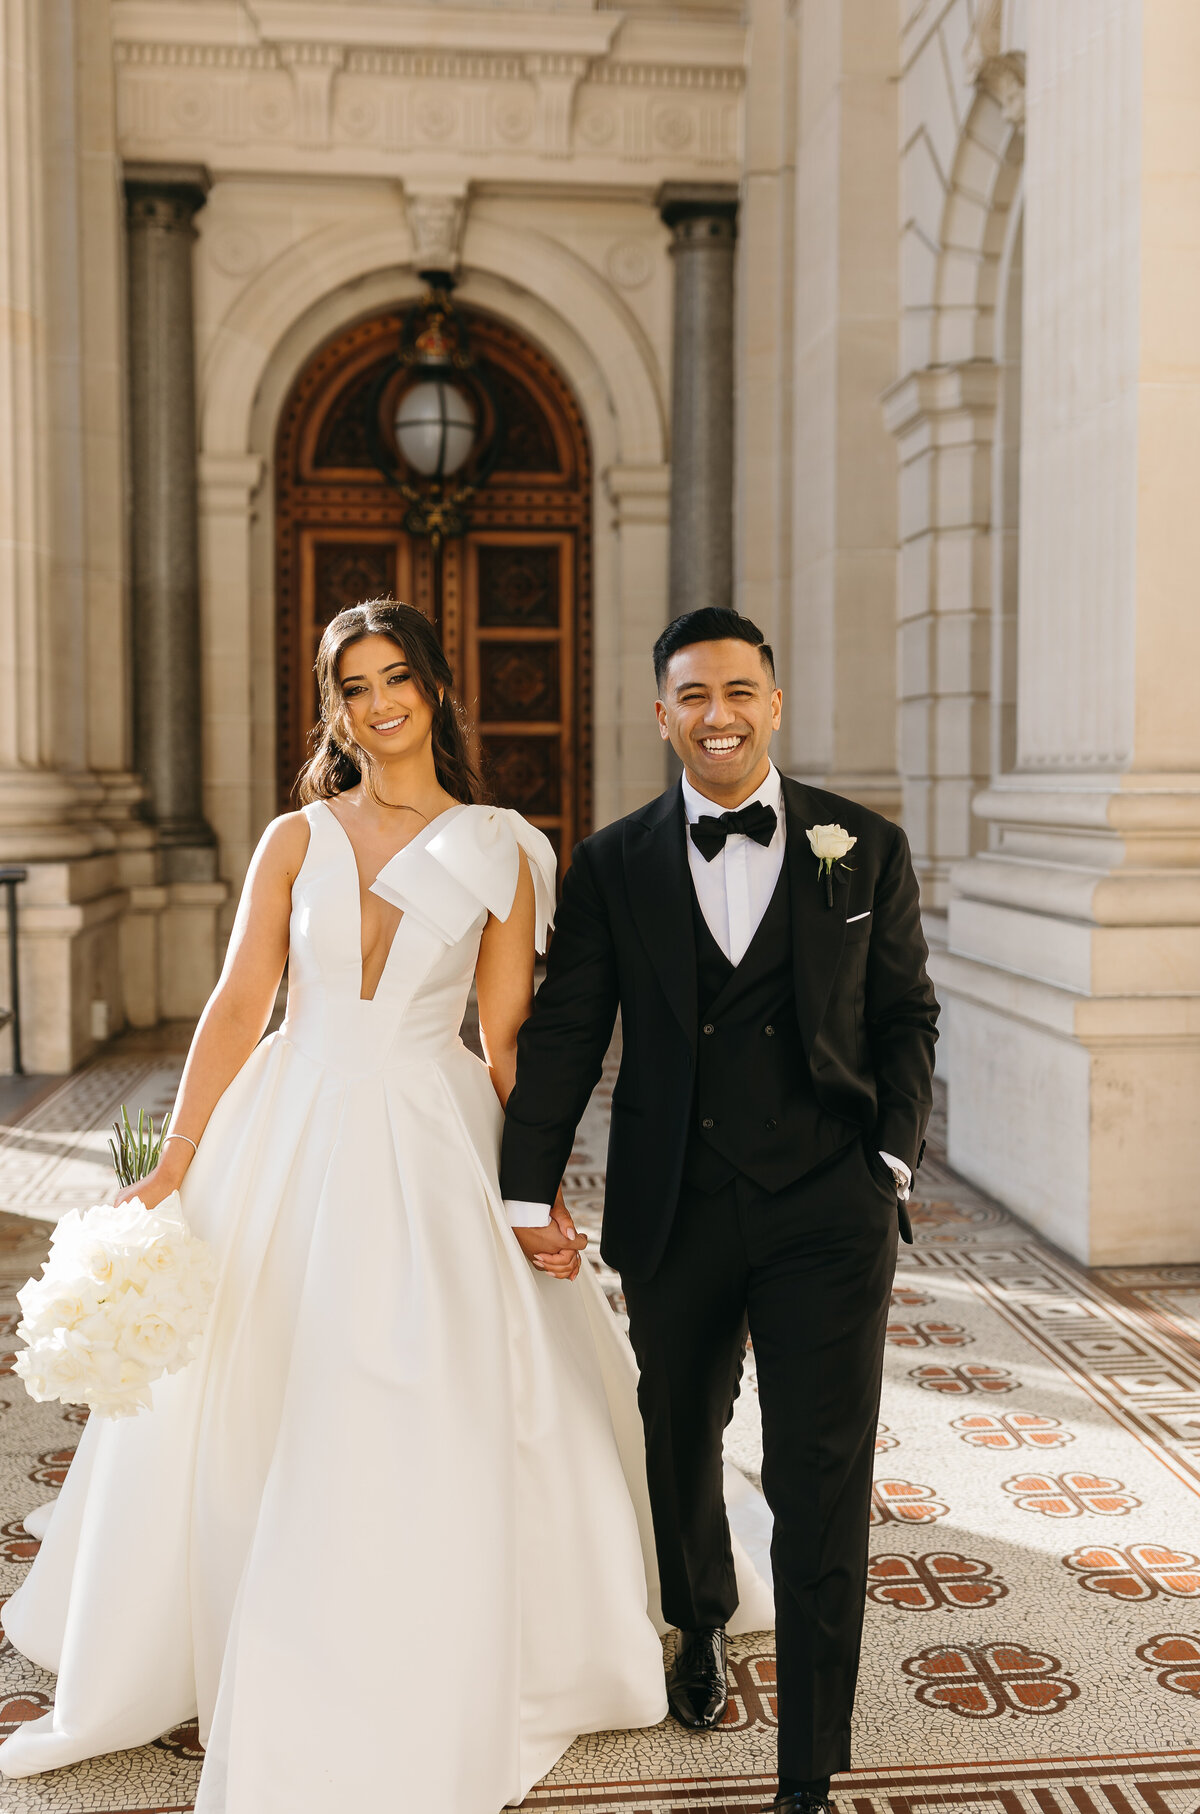 An image of a smiling bride and groom. They are walking hand in hand with the bride on the left and the groom on the right. The bride is holding a white bouquet in her  right hand and the groom has his left hand in his pocket/